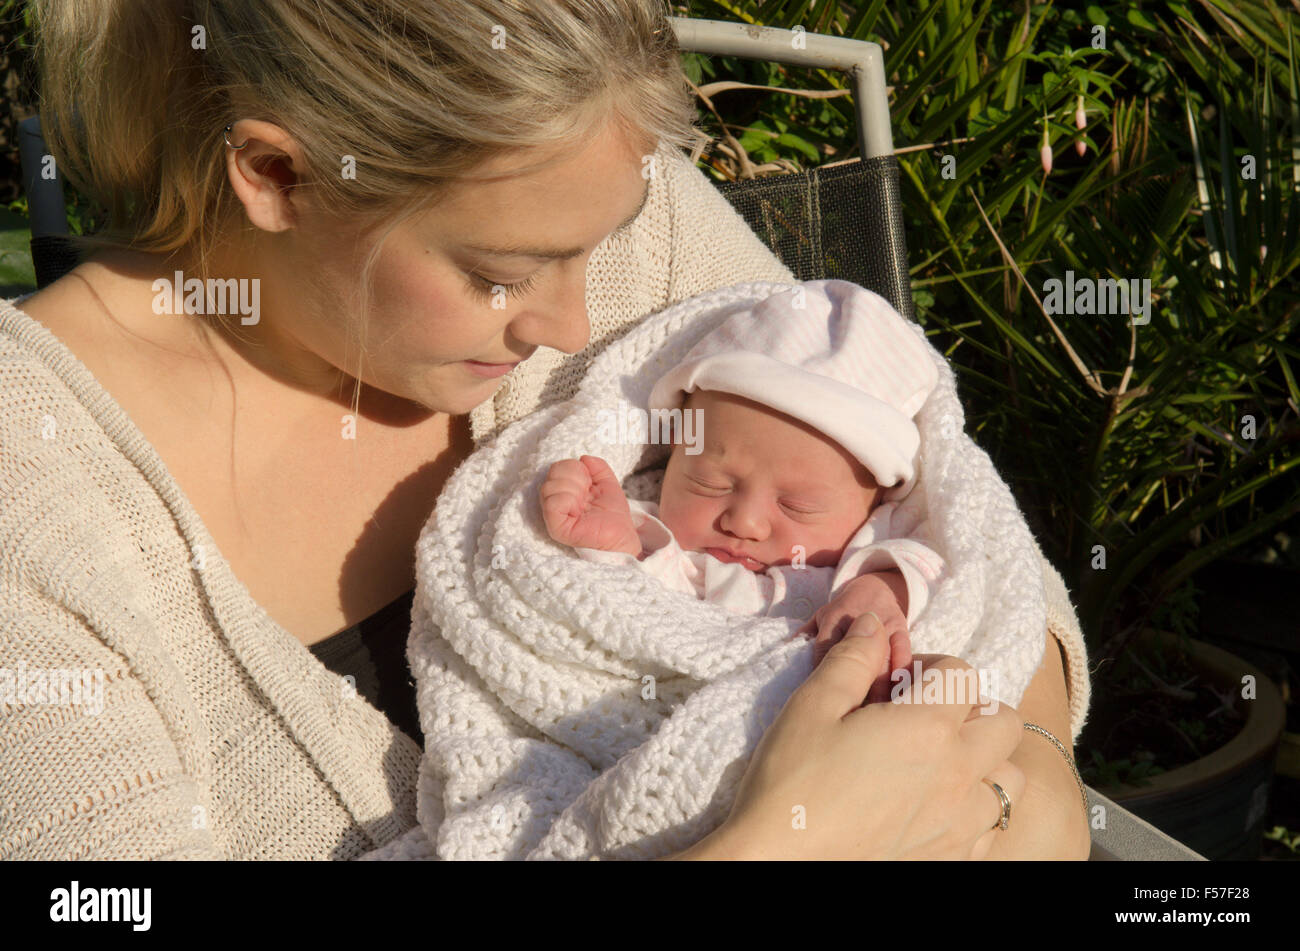 Mother with one day old baby girl sitting in sunshine. Baby slightly jaundiced. UK. Stock Photo